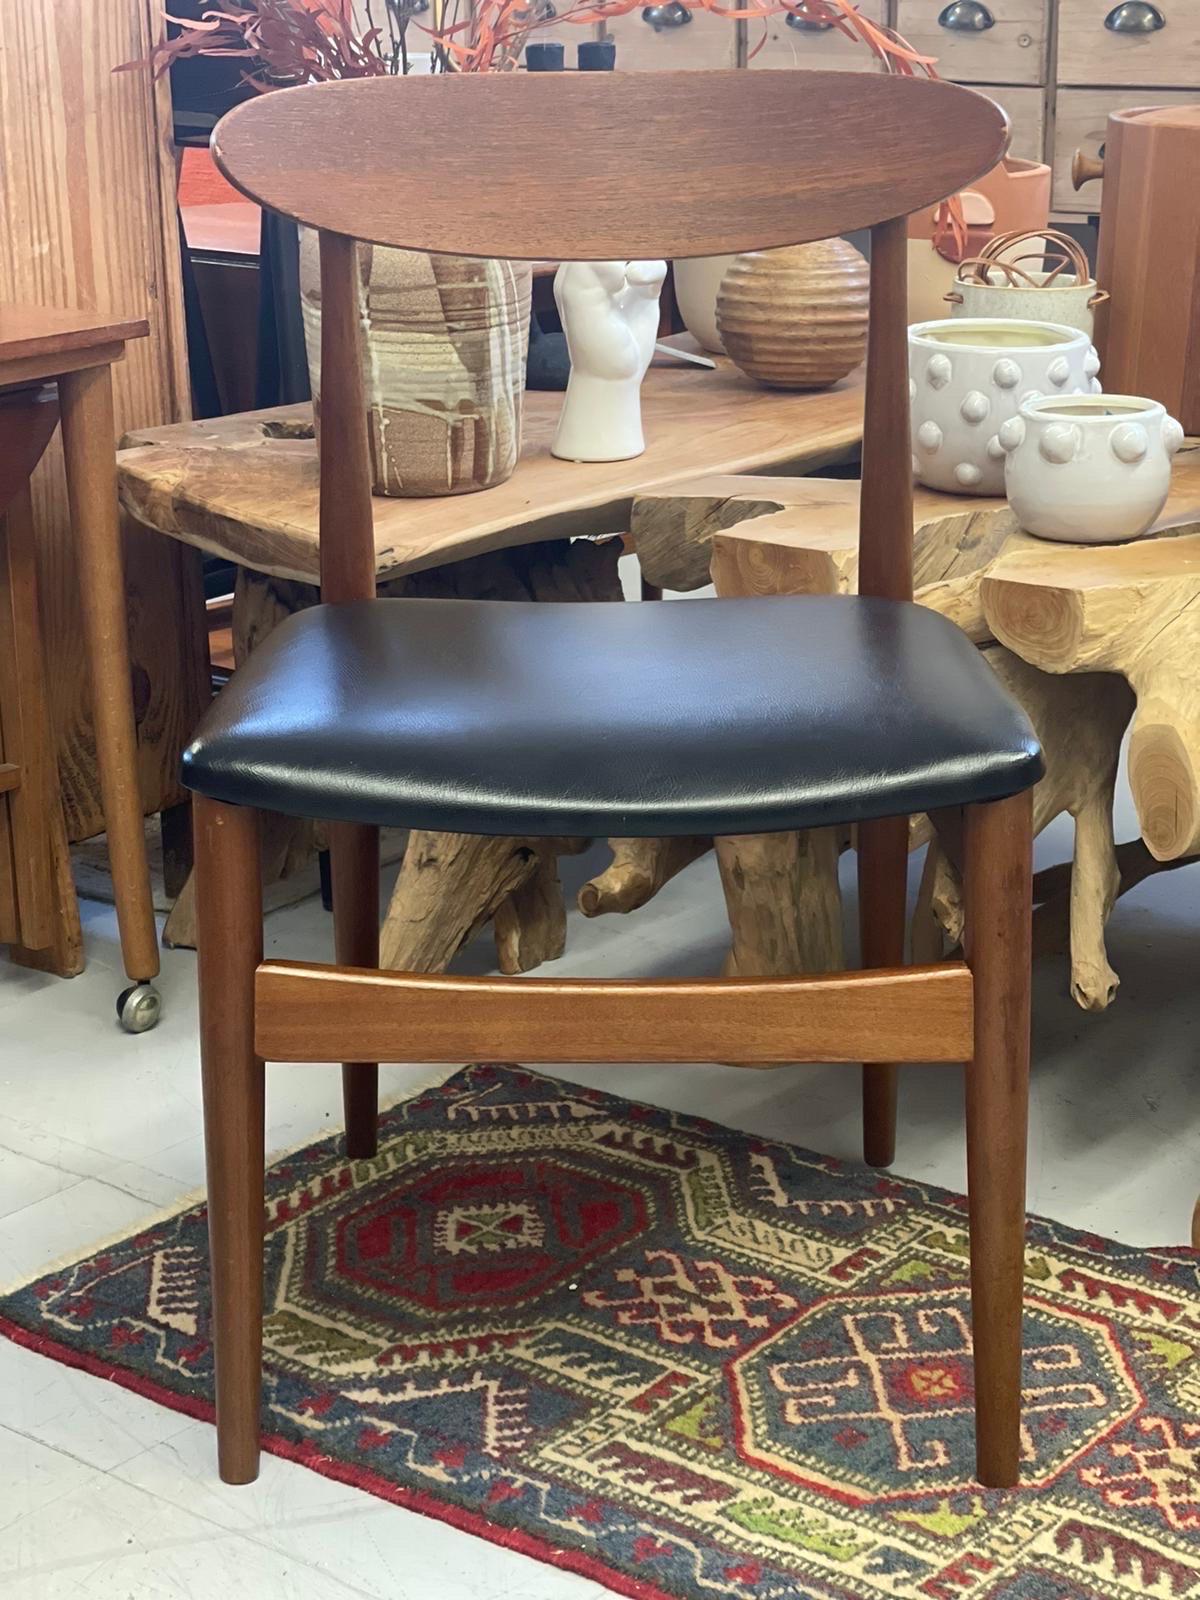 Vintage Mid-Century Modern Chair

Dimensions. 19 1/2 W ; 18 D ; 30 H

Seat Height. 17.